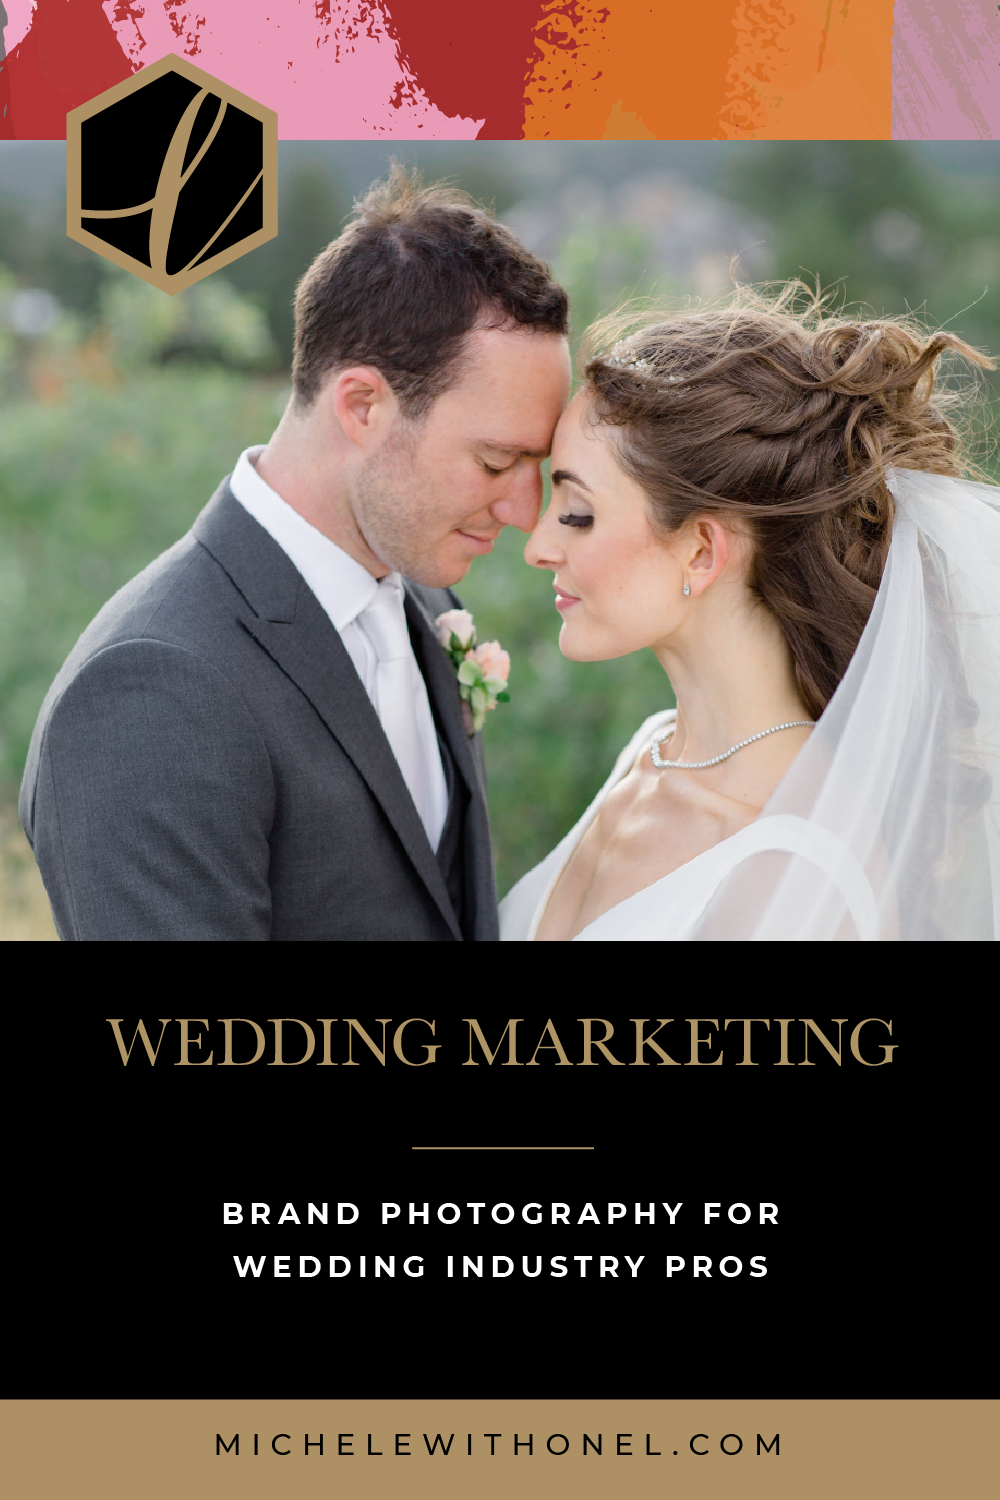 Are you a wedding planner, florist, or venue owner looking for ways to level up your wedding marketing? This post is for you! Learn how a personal brand photo shoot can help you as a wedding professional — including how to tell the story of your brand with compelling imagery, how to use consistency to build trust and create a cohesive brand, and how to curate photos to showcase what sets you apart. #weddingplanner #weddingflorist #weddingvenue #luxurywedding